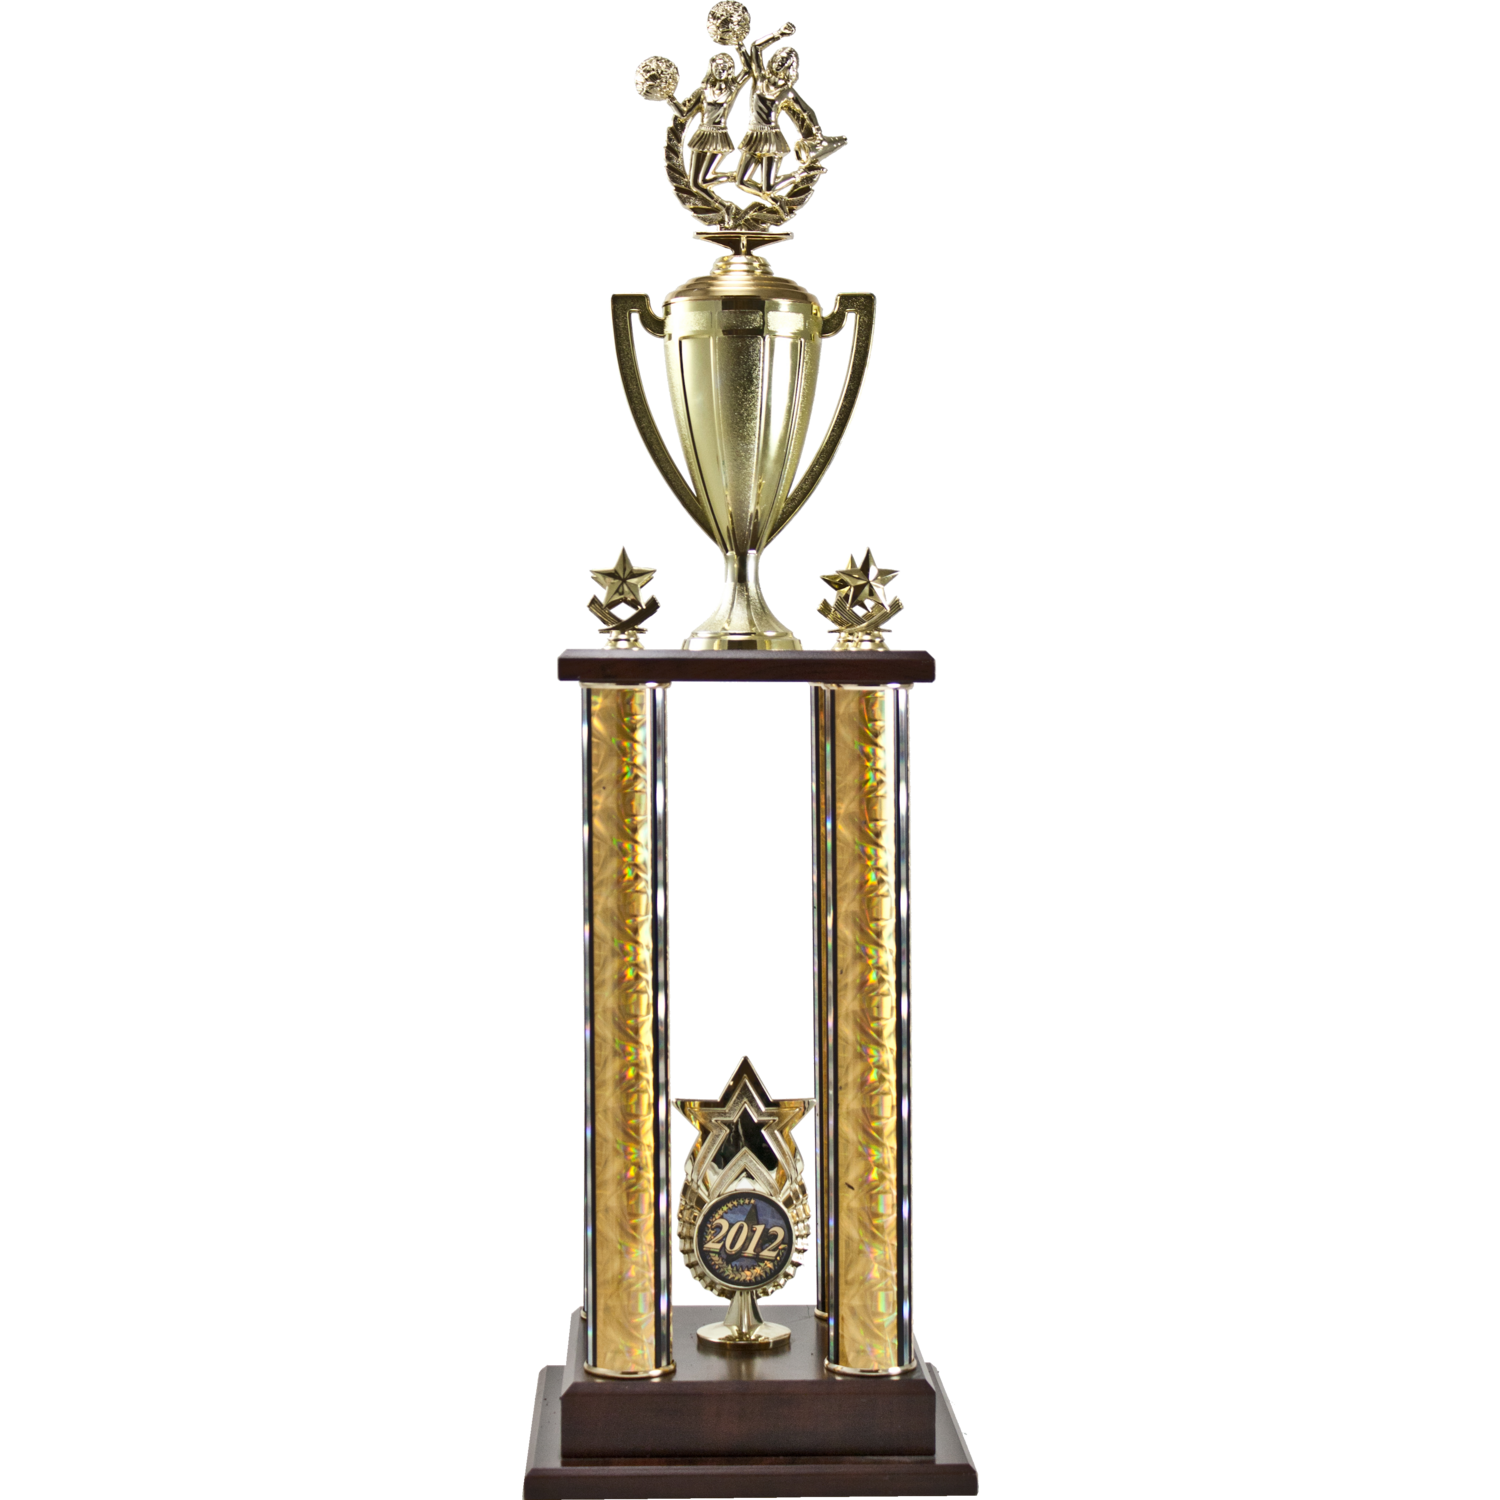 Two-Tier 4 Post Trophy with Star "Exclusive" Star